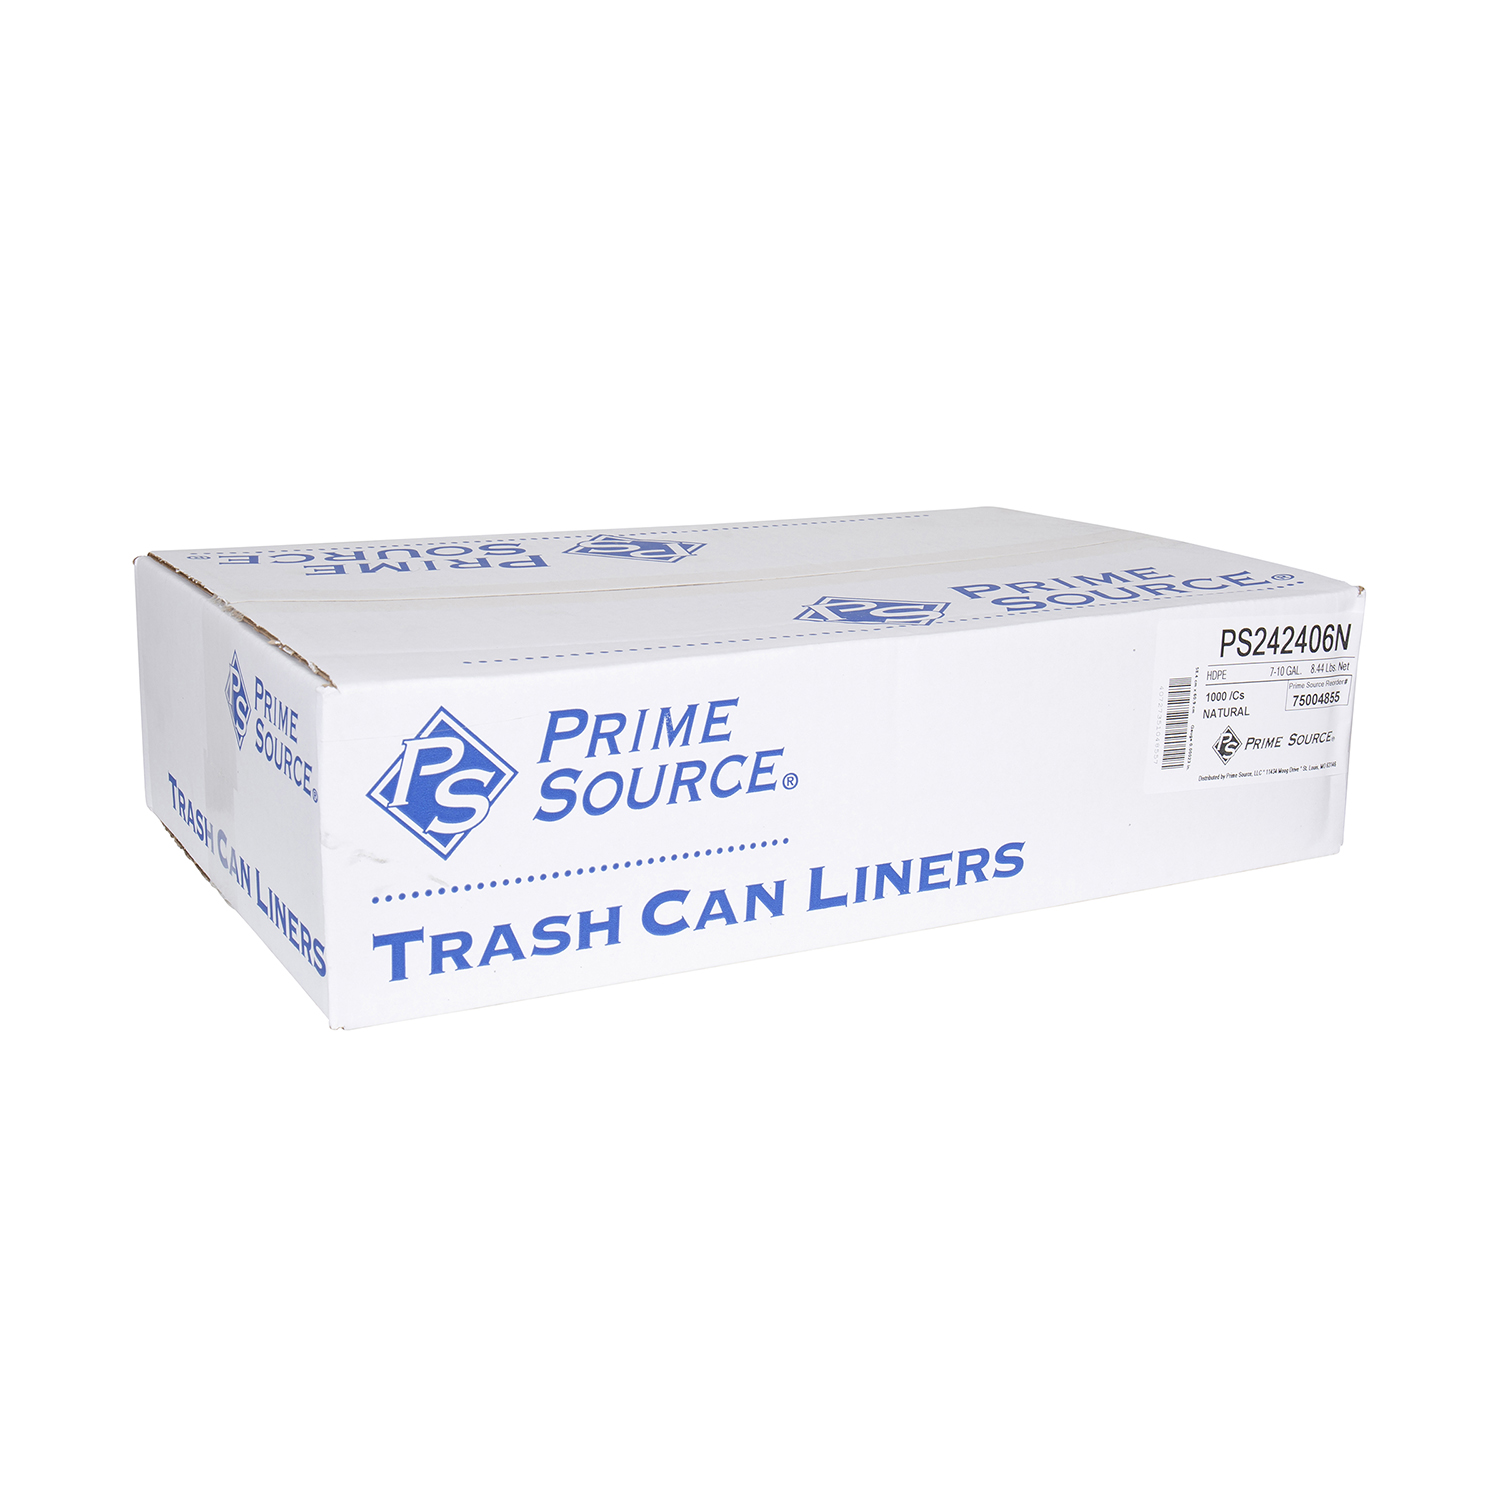 Heritage High-Density Waste Can Liners, 60 gal, 17 Mic, 38 x 60, Black, 200/Carton